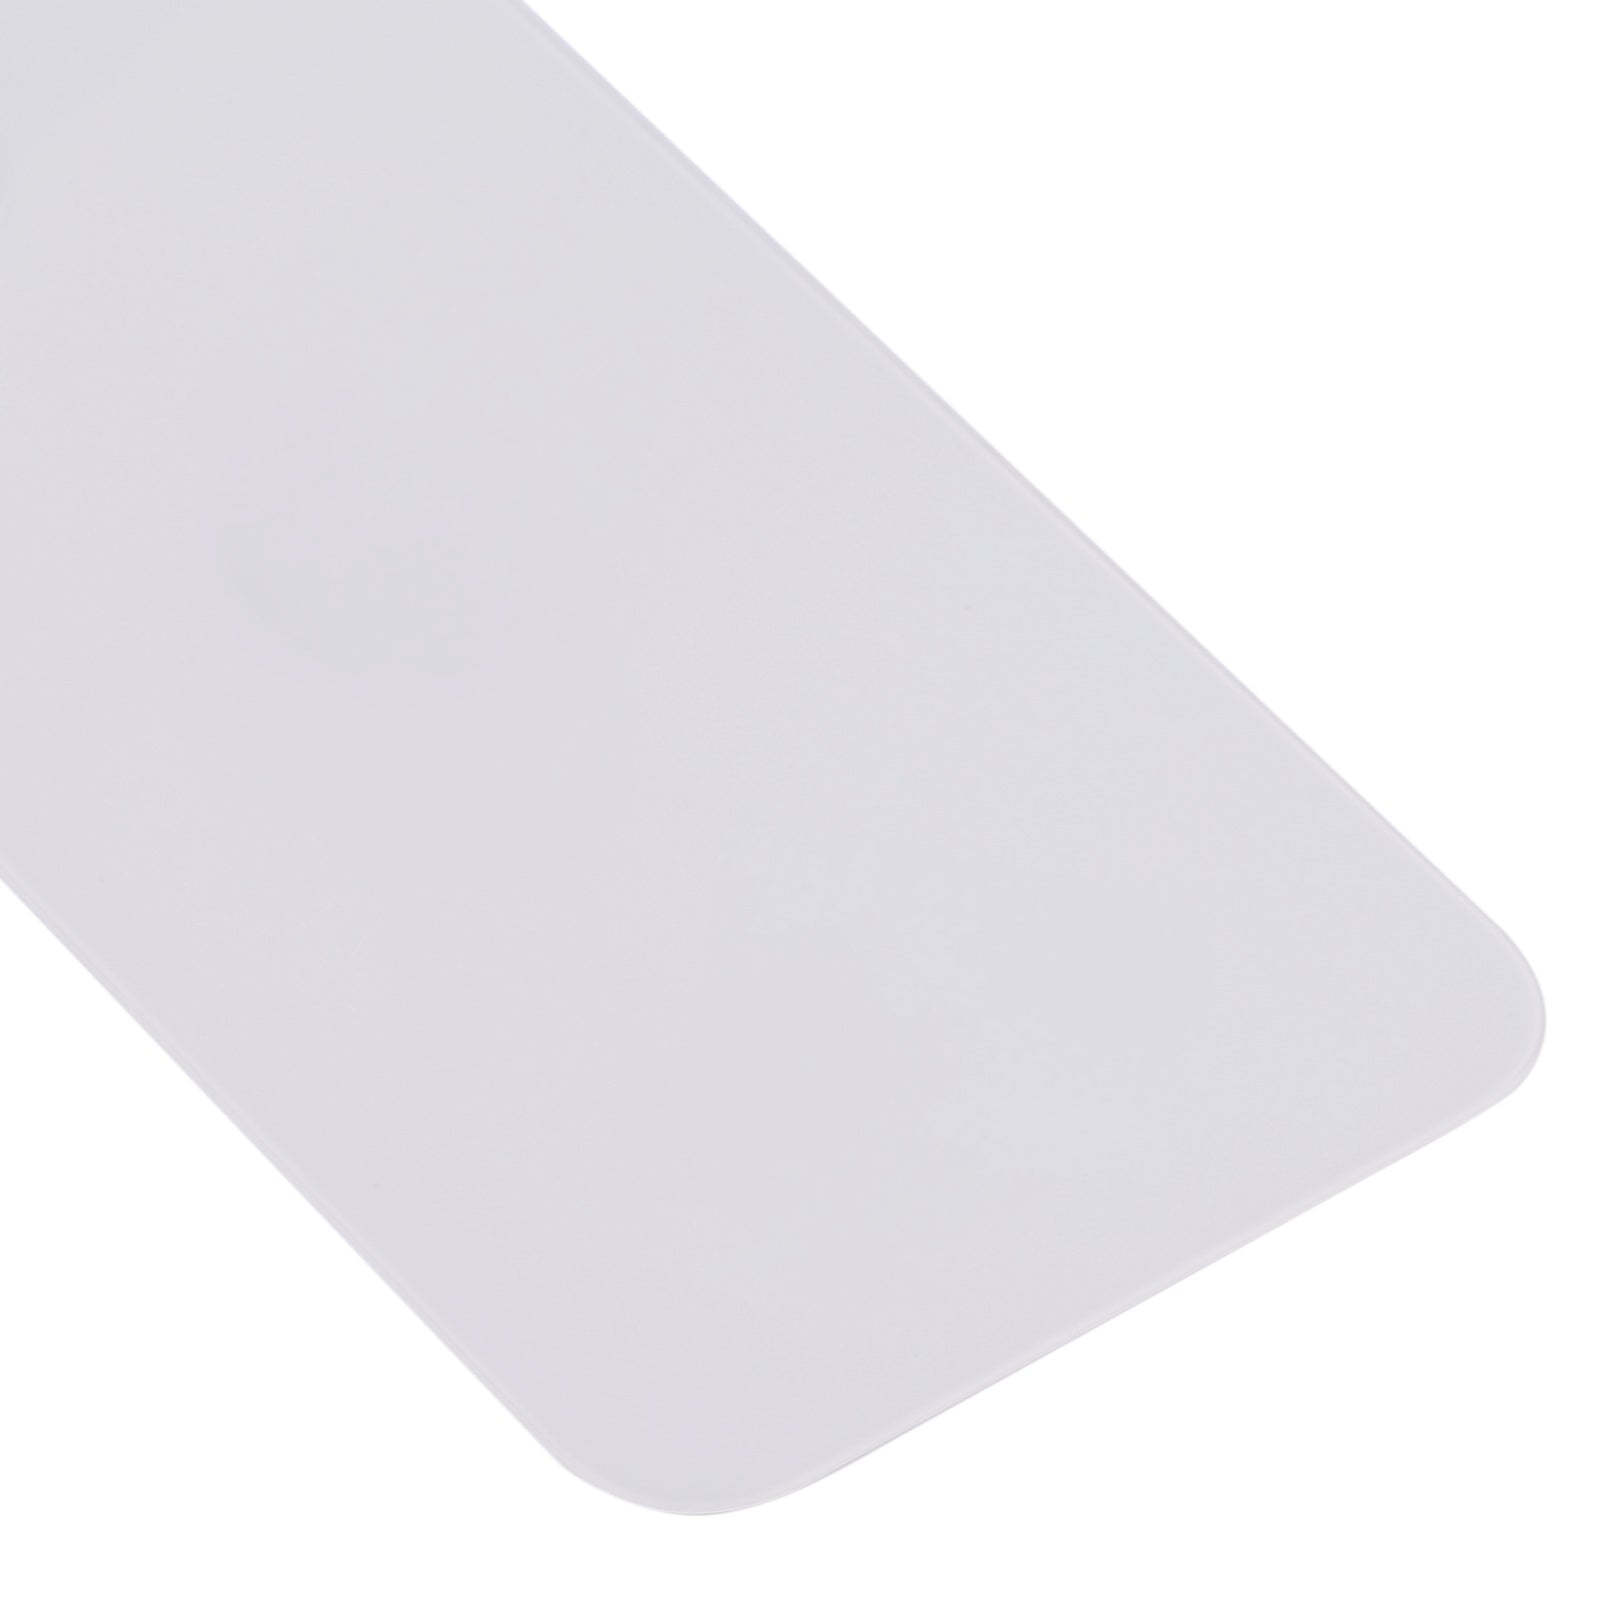 Battery Cover Back Cover Apple iPhone 13 Mini White